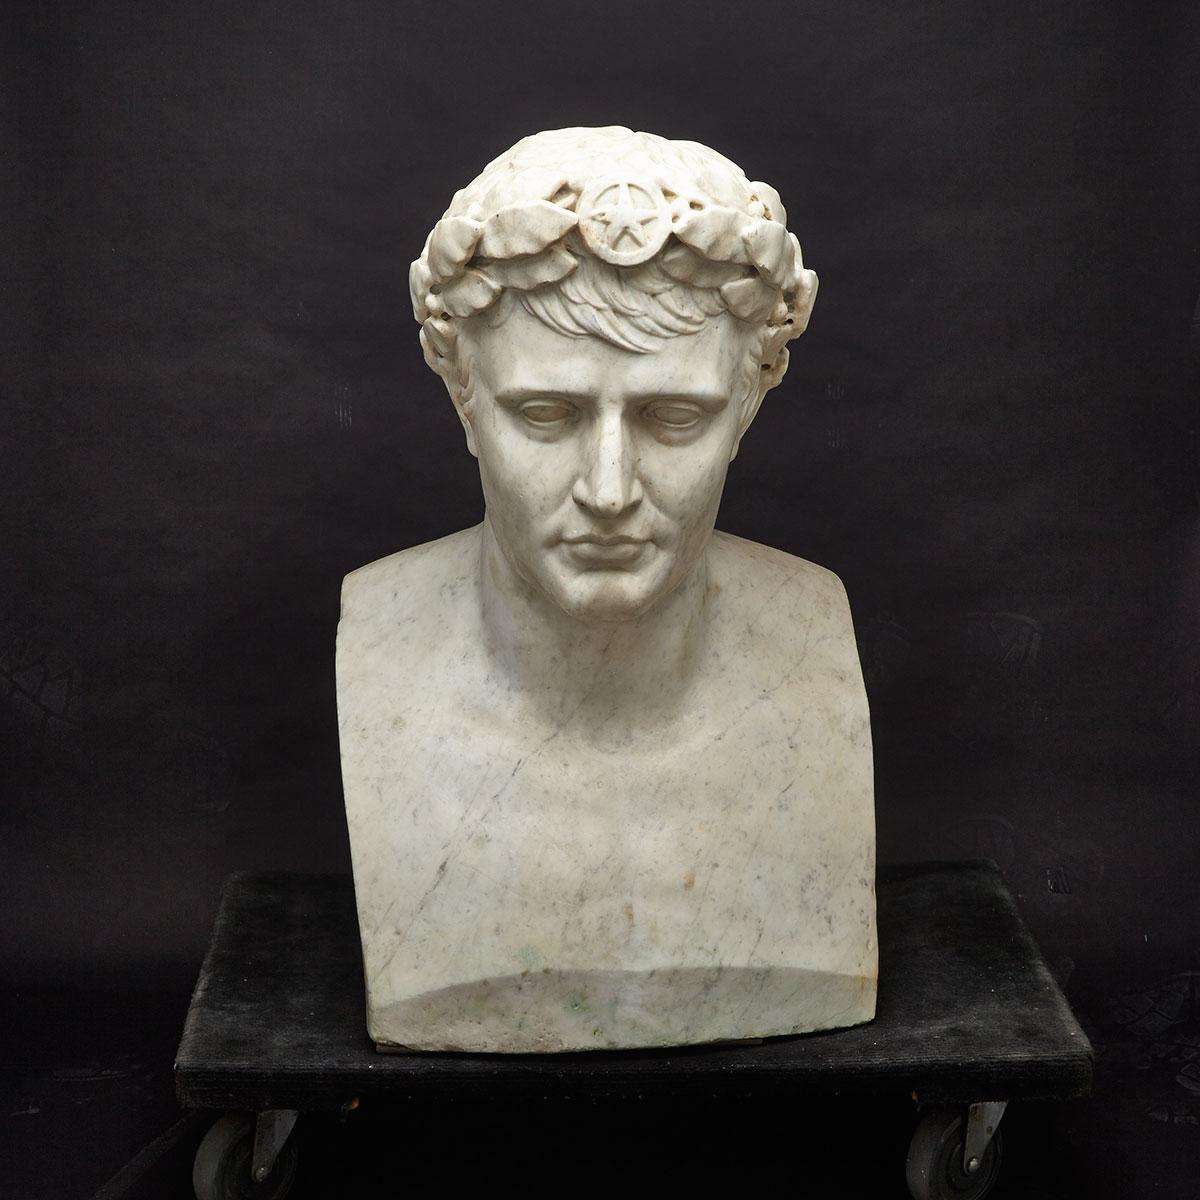 Large French White Marble Bust of Napoleon I, Emperor, 19th century